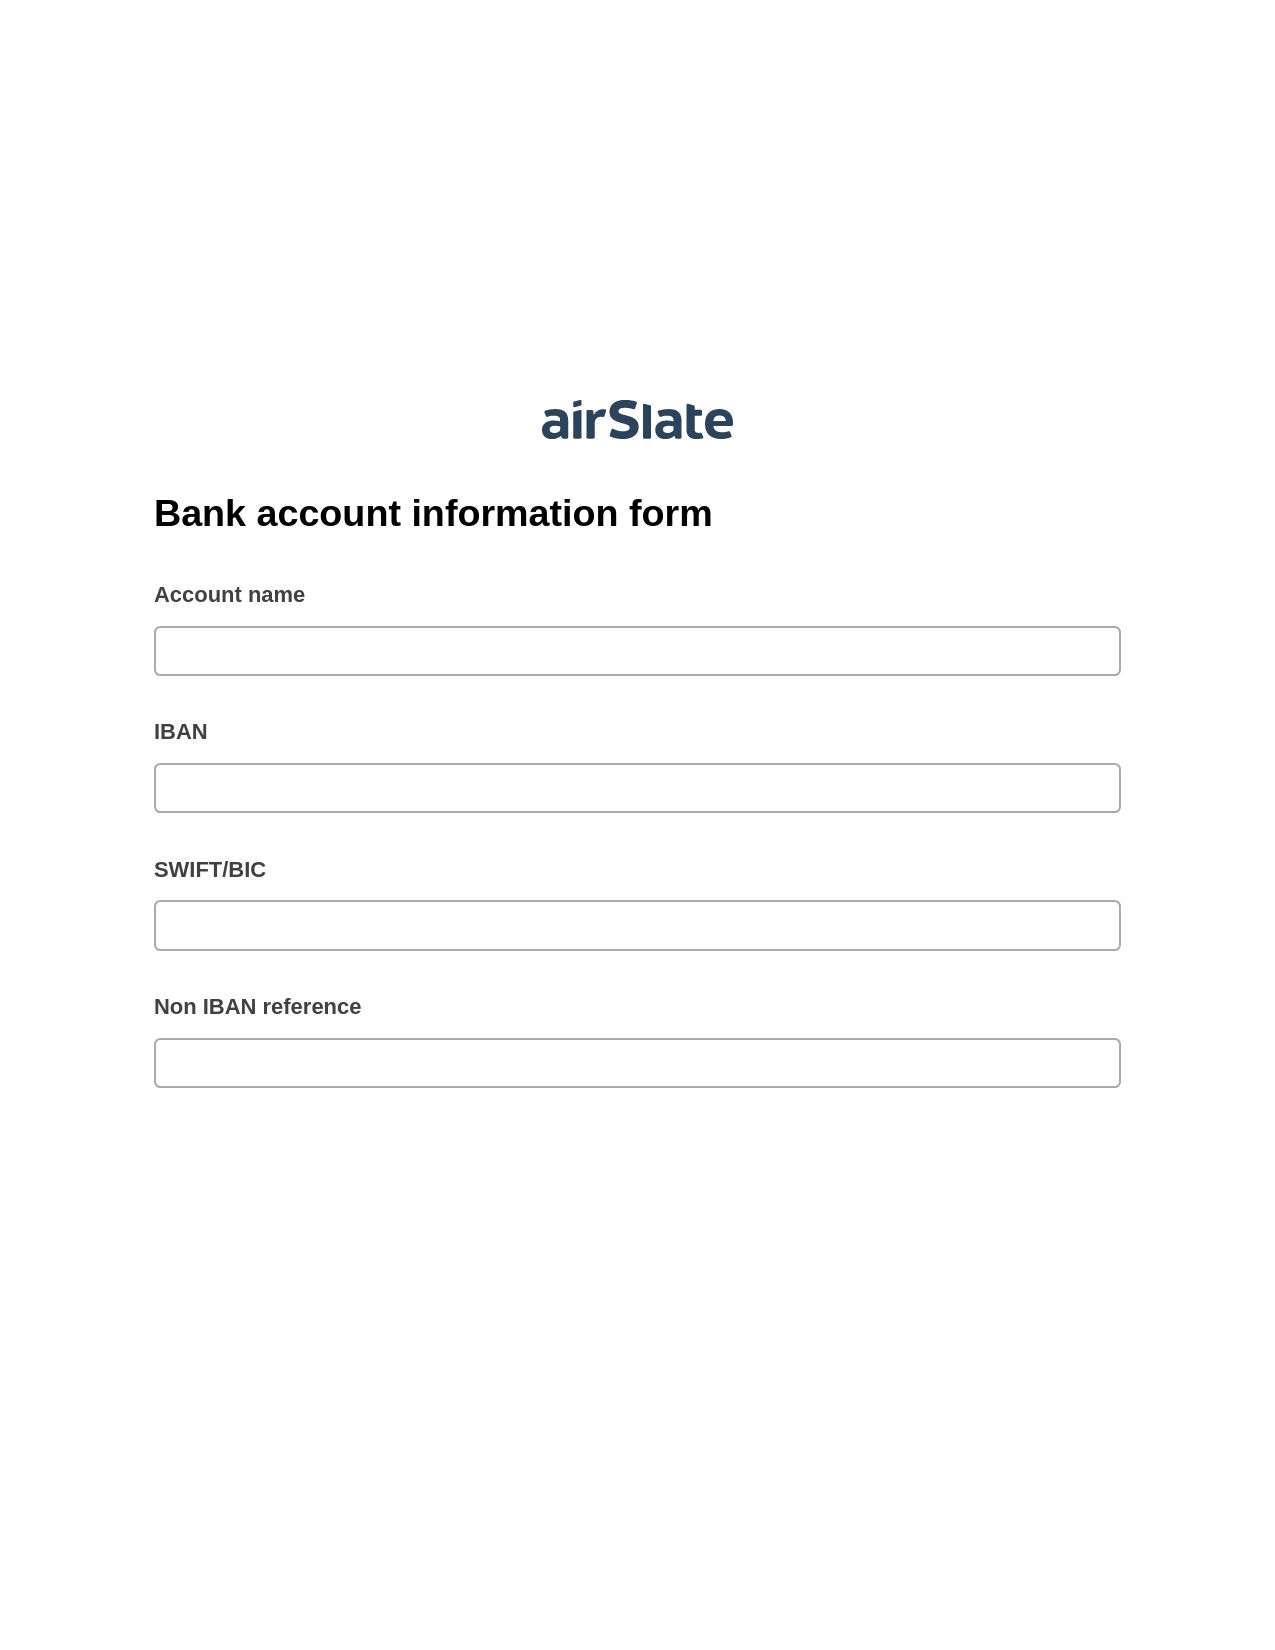 Multirole Bank account information form Pre-fill from NetSuite Records Bot, Document Hide Bot, Export to Smartsheet